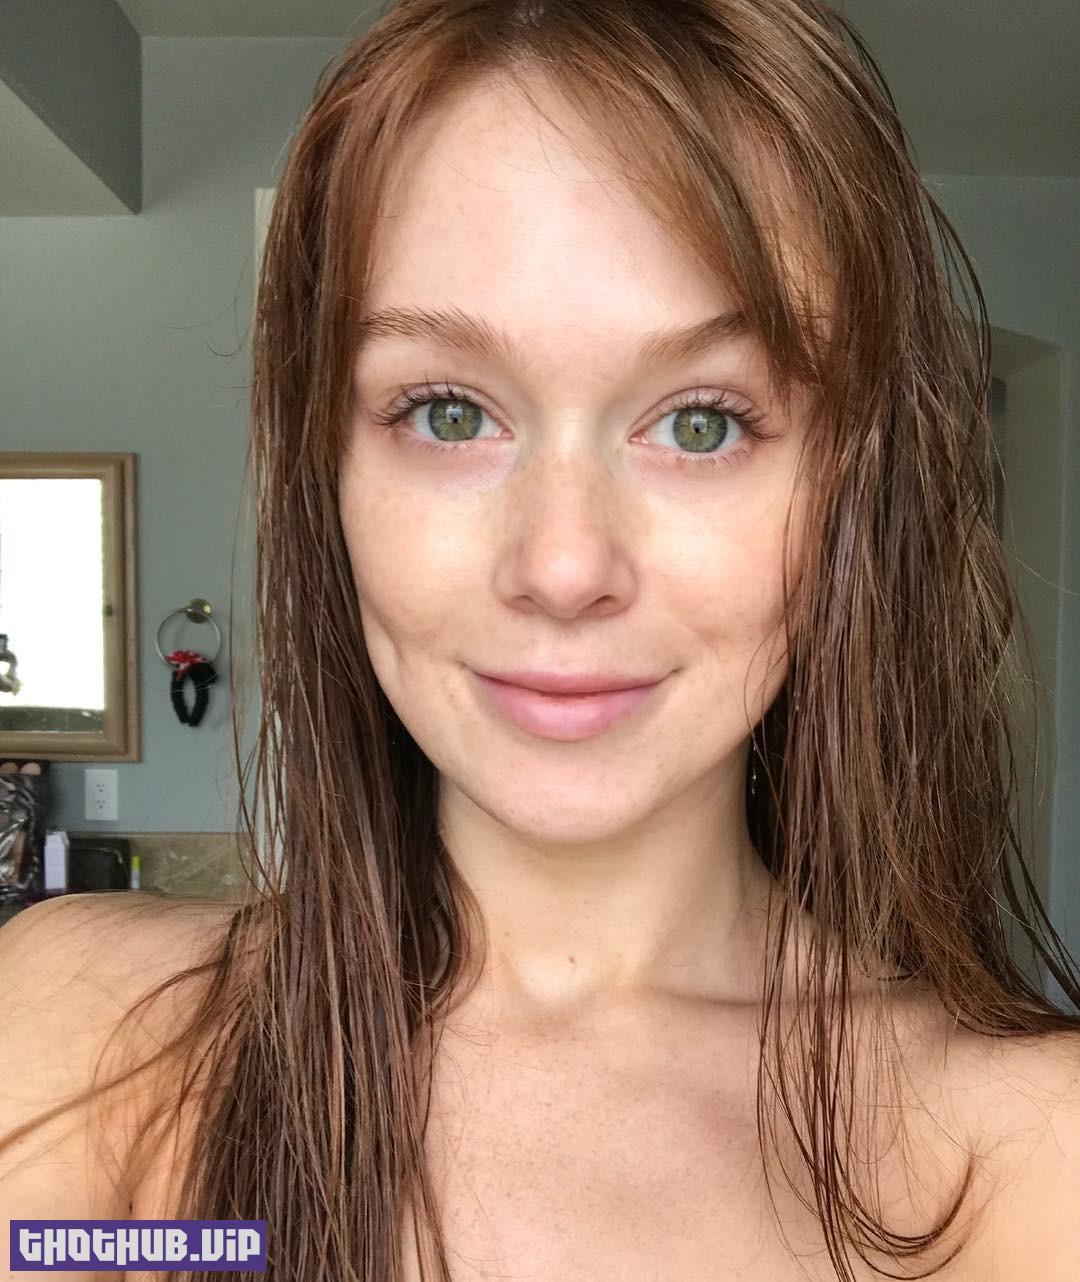 1666028068 164 Leanna Decker Nude TheFappening over 100 Photos